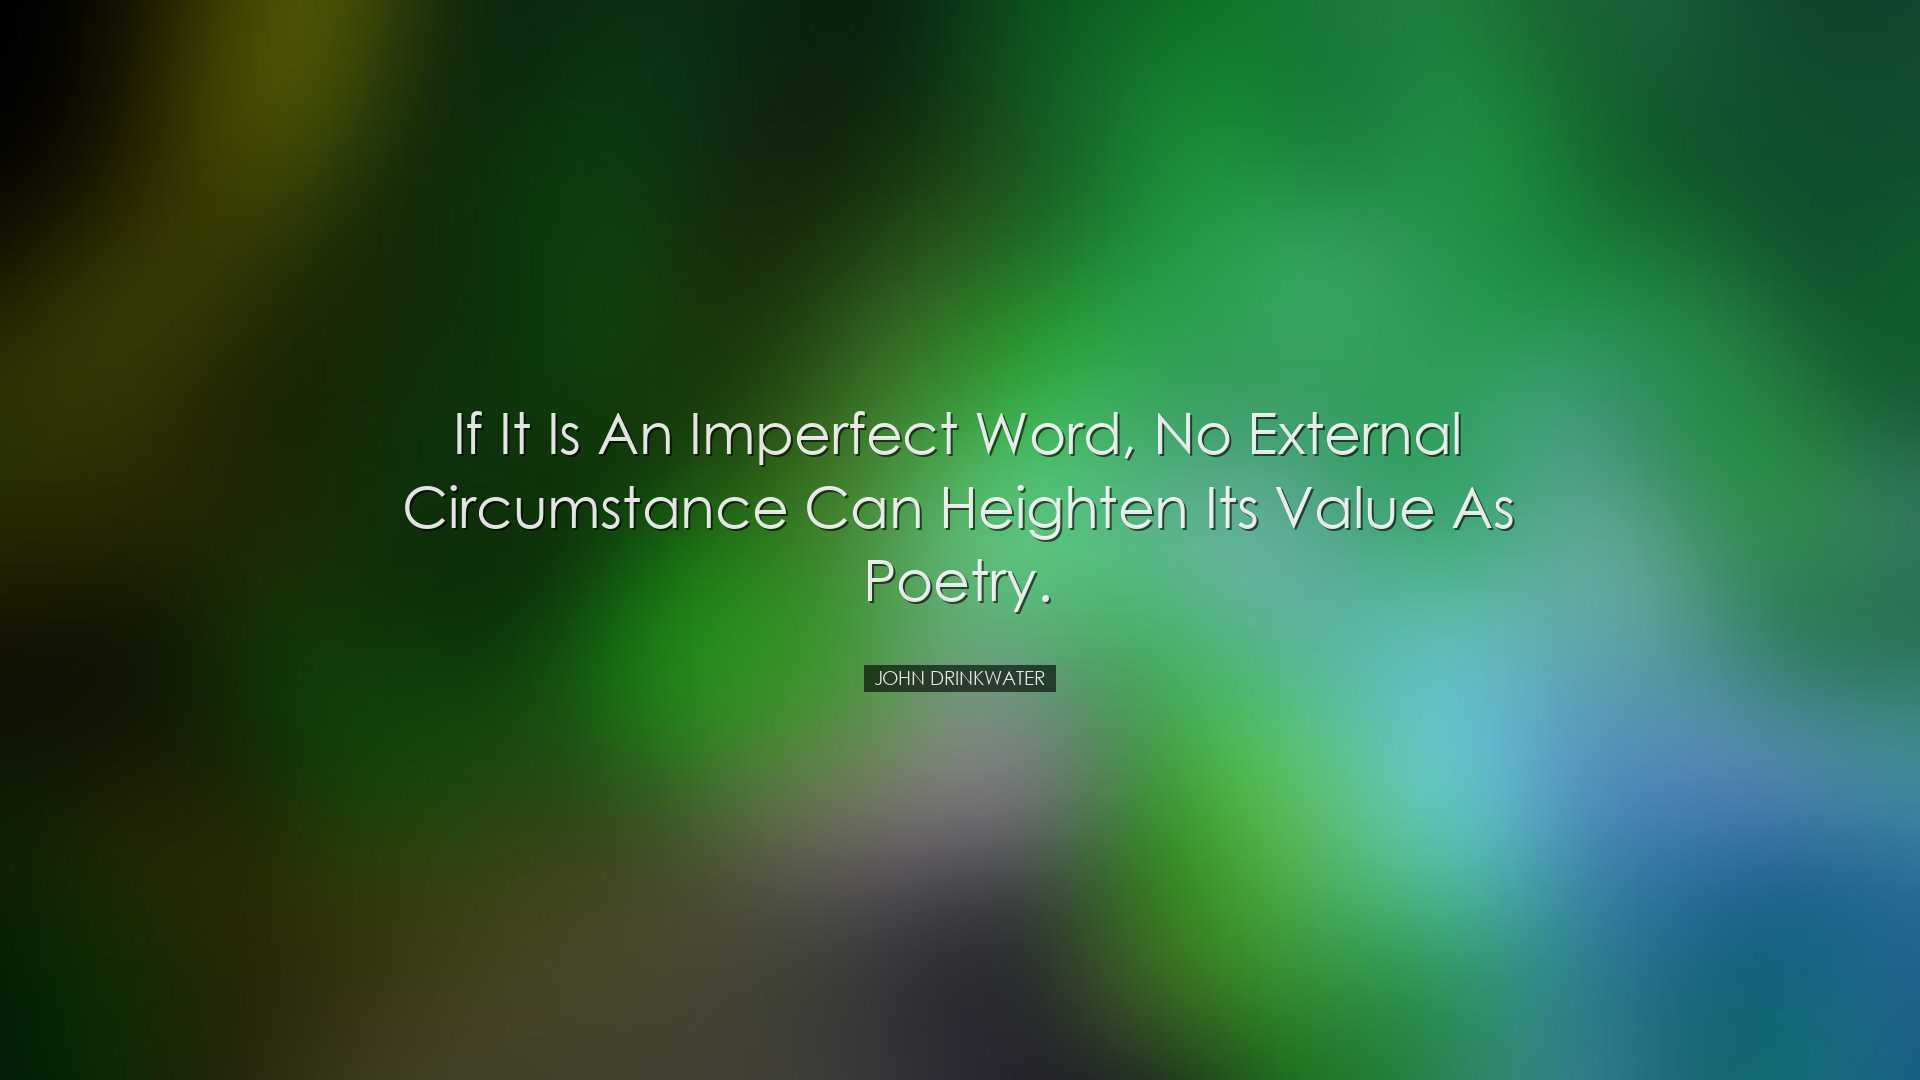 If it is an imperfect word, no external circumstance can heighten